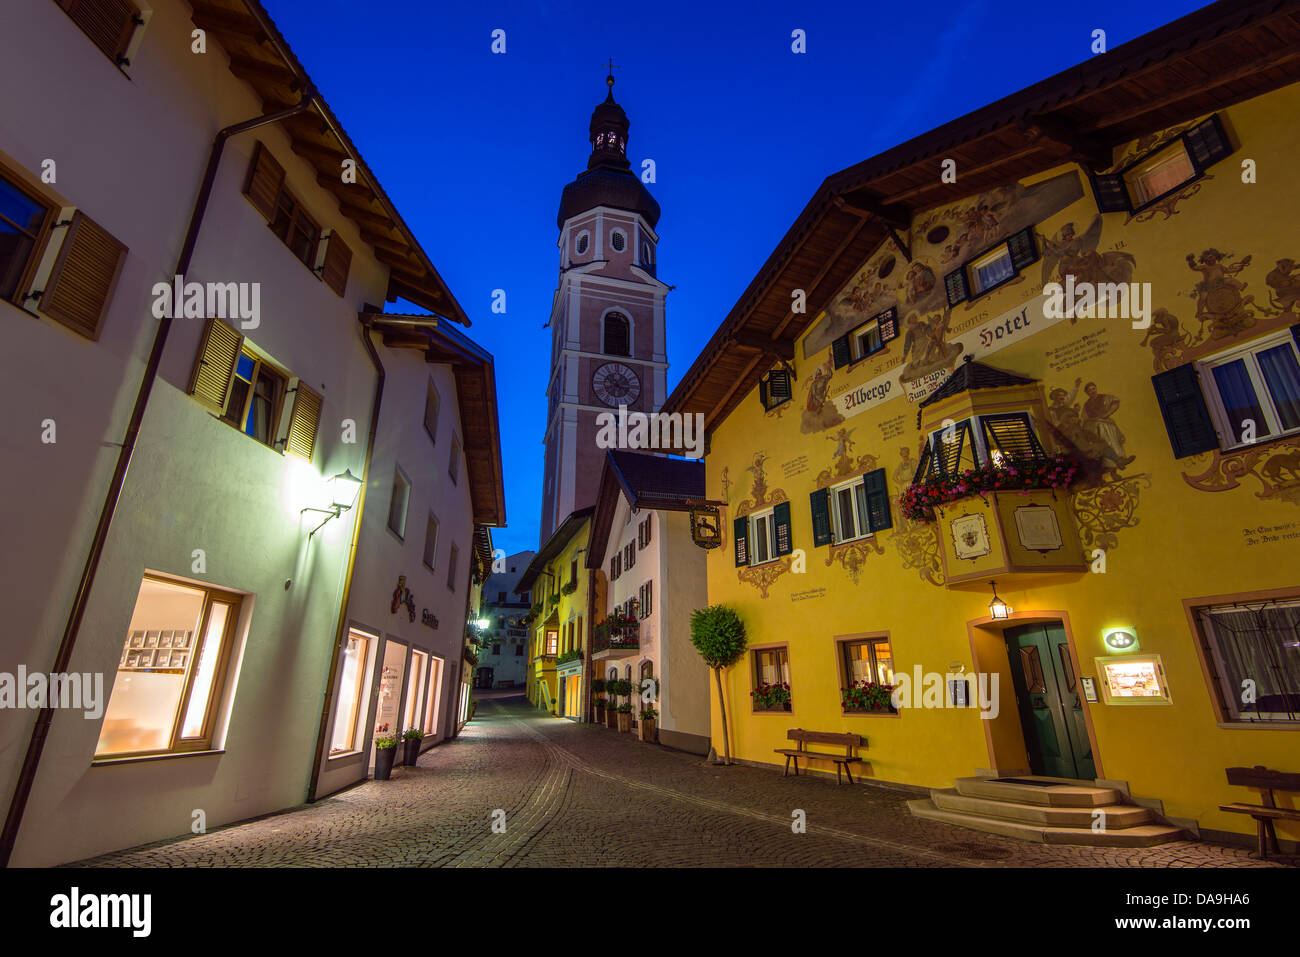 Street in the old town by night, Castelrotto Kastelruth, Alto Adige or South Tyrol, Italy Stock Photo